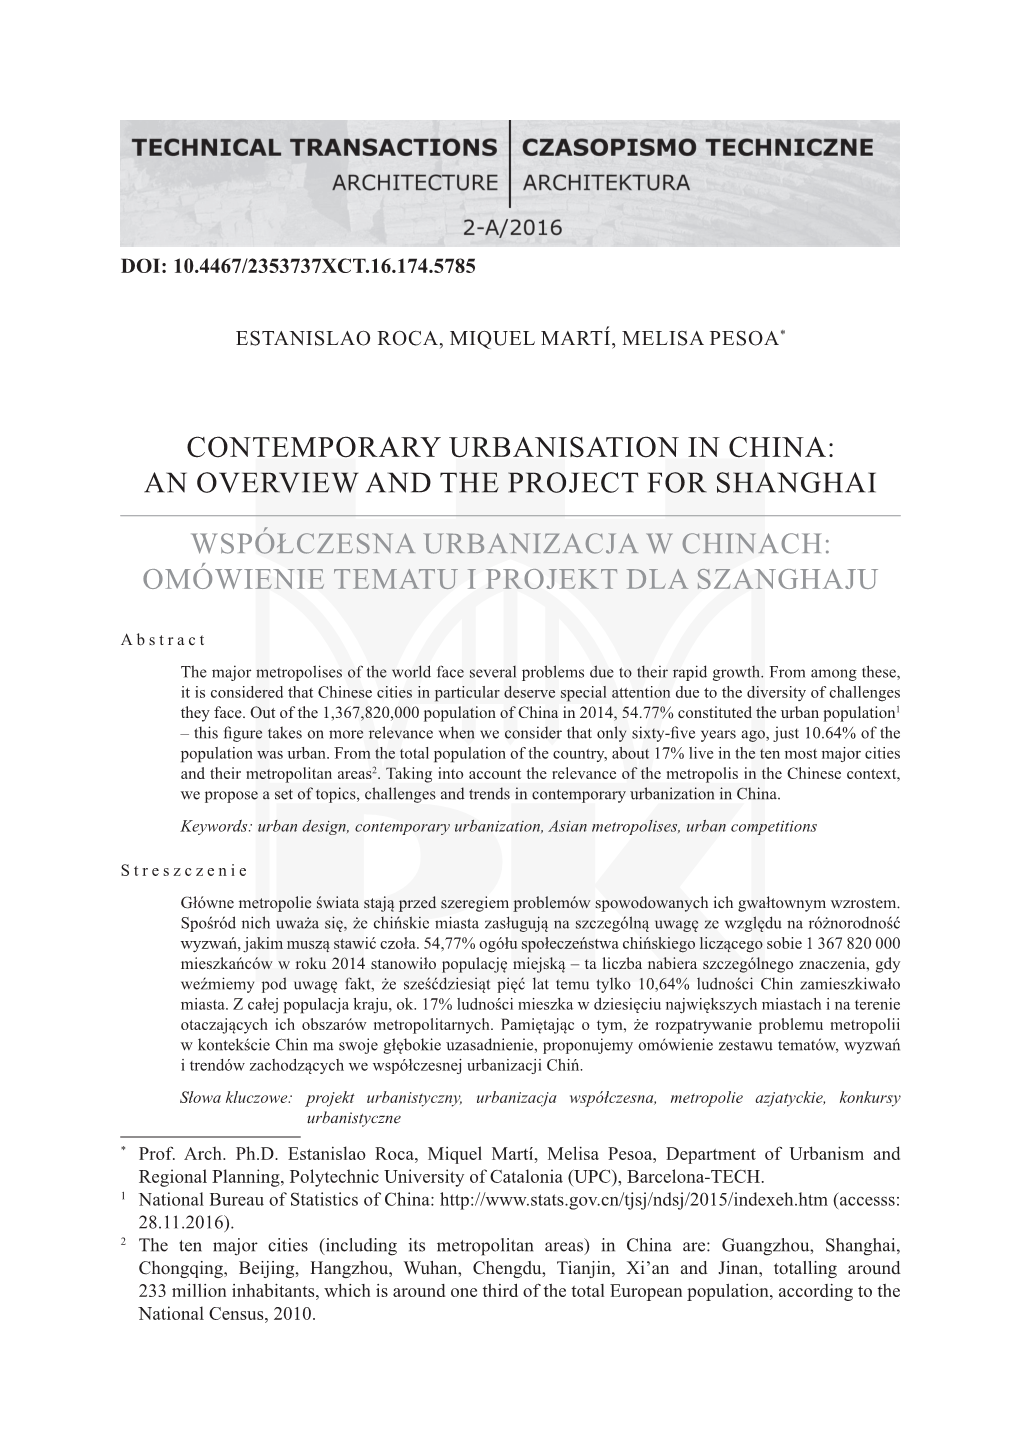 Contemporary Urbanisation in China: an Overview and the Project for Shanghai